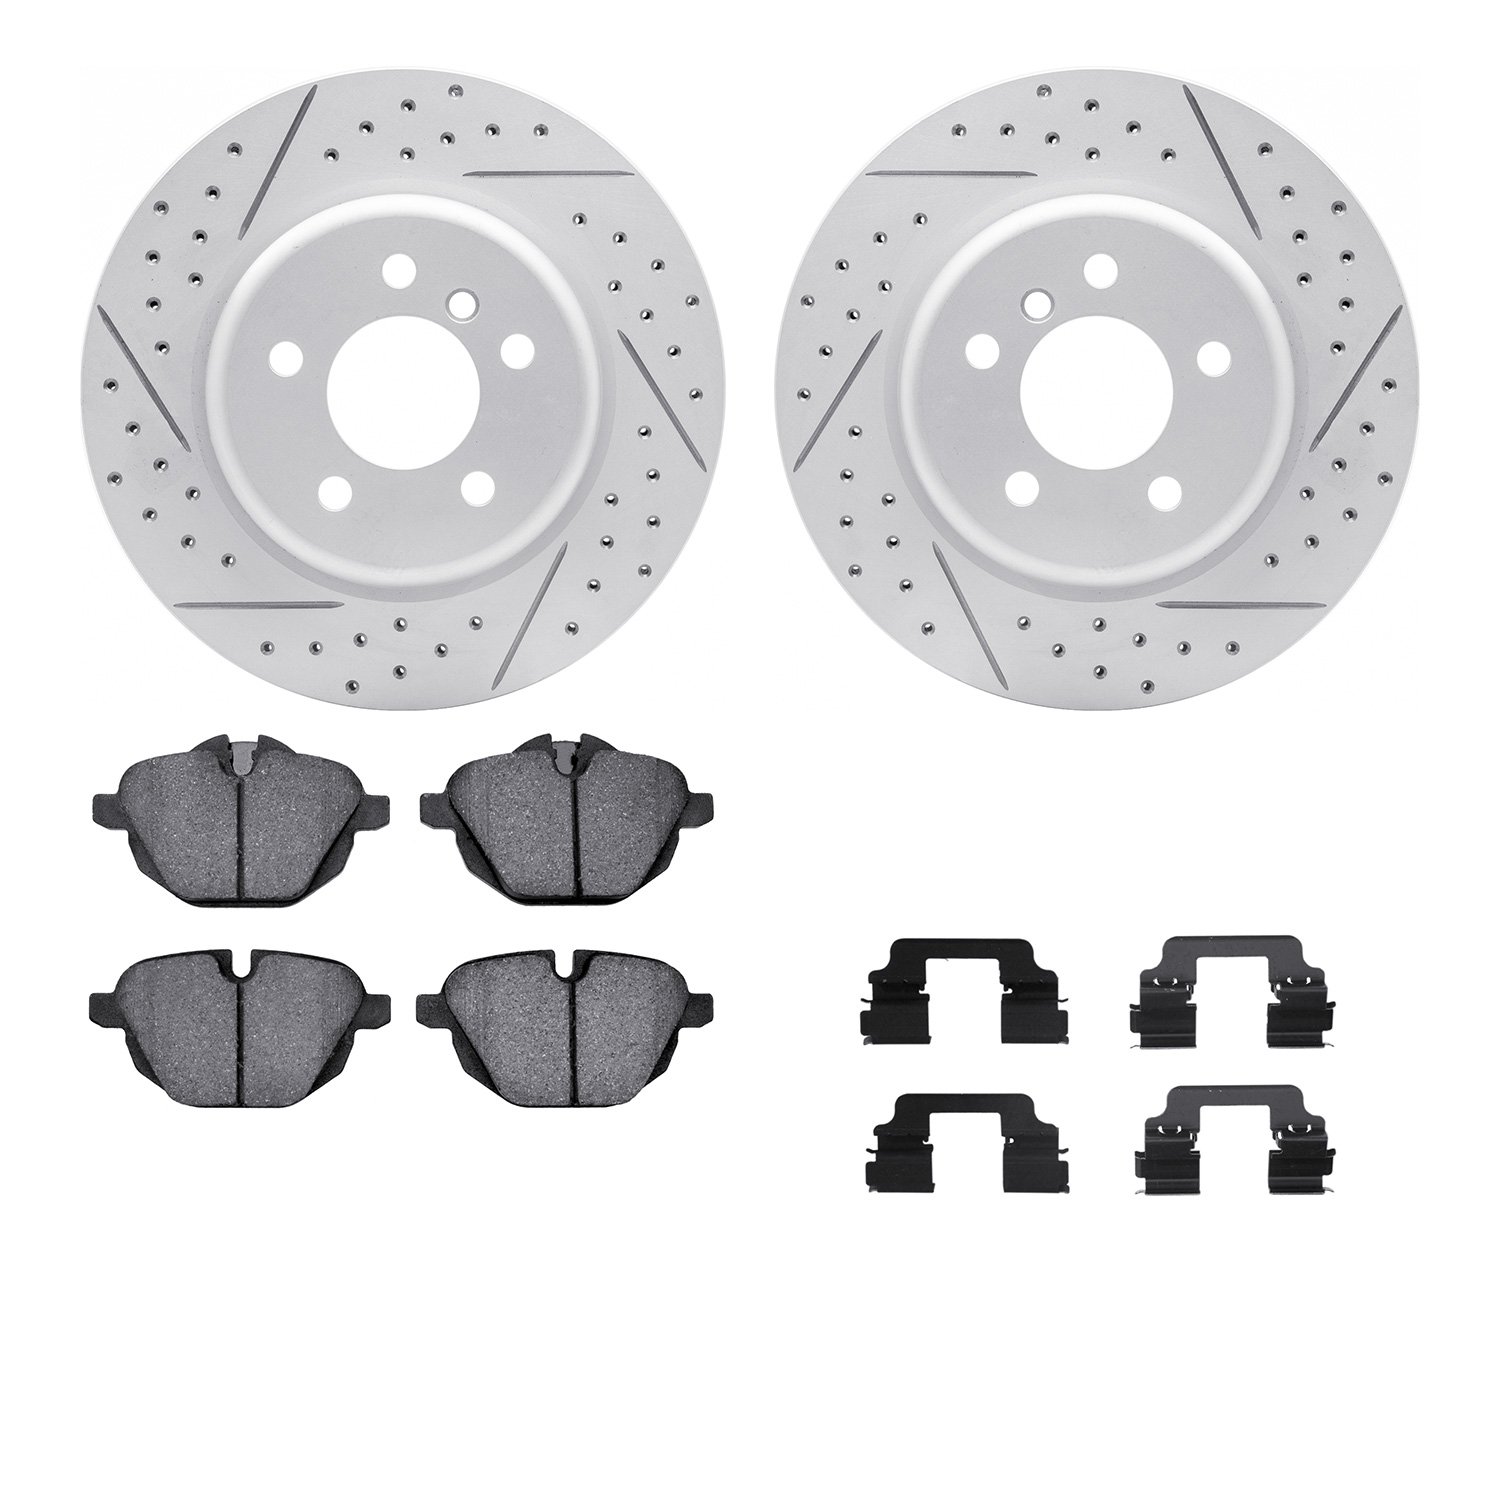 2512-31068 Geoperformance Drilled/Slotted Rotors w/5000 Advanced Brake Pads Kit & Hardware, 2011-2016 BMW, Position: Rear